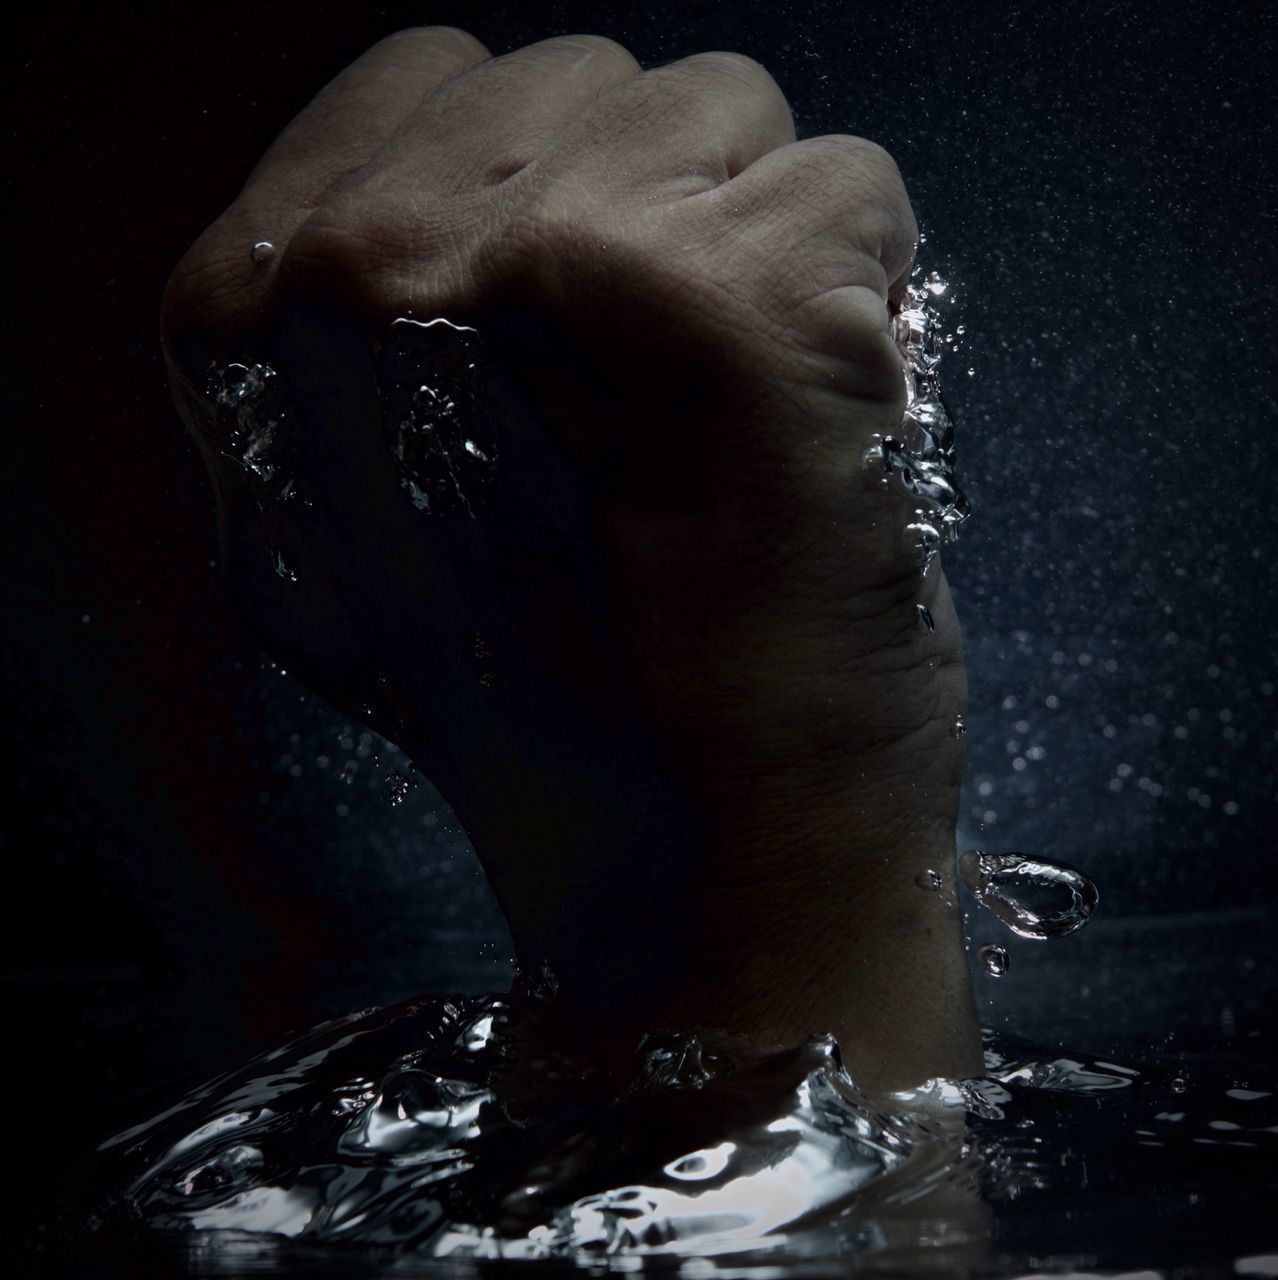 CLOSE-UP OF WOMAN HAND WITH WATER